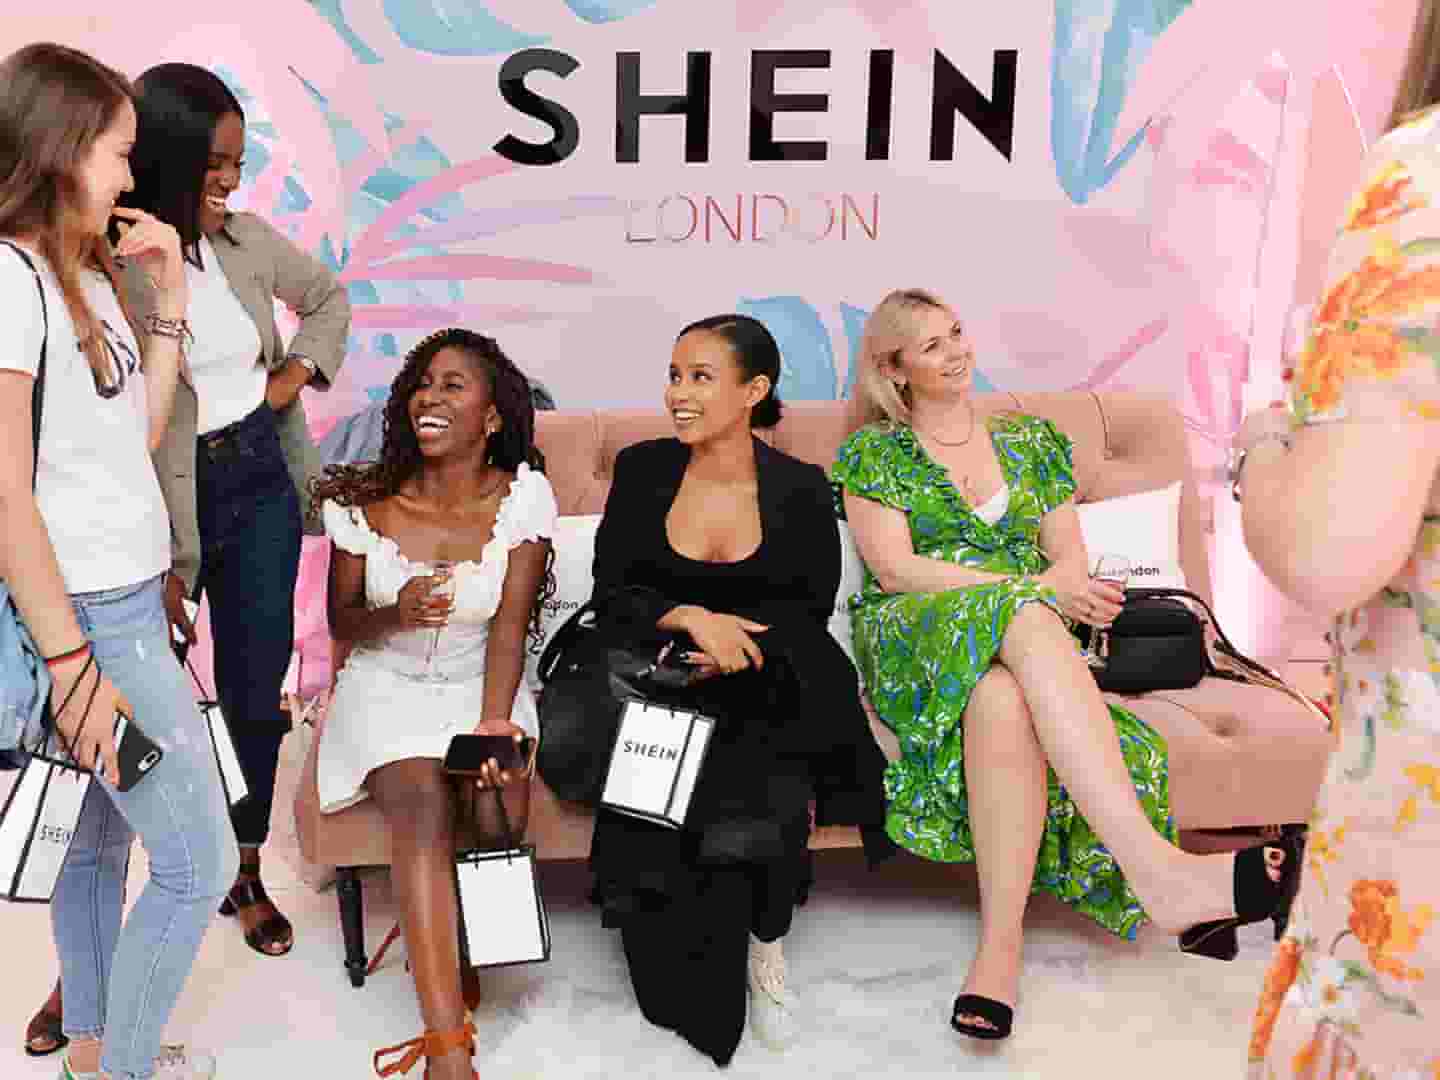 Shein Might Make A Comeback On Amazon As A Sublet!